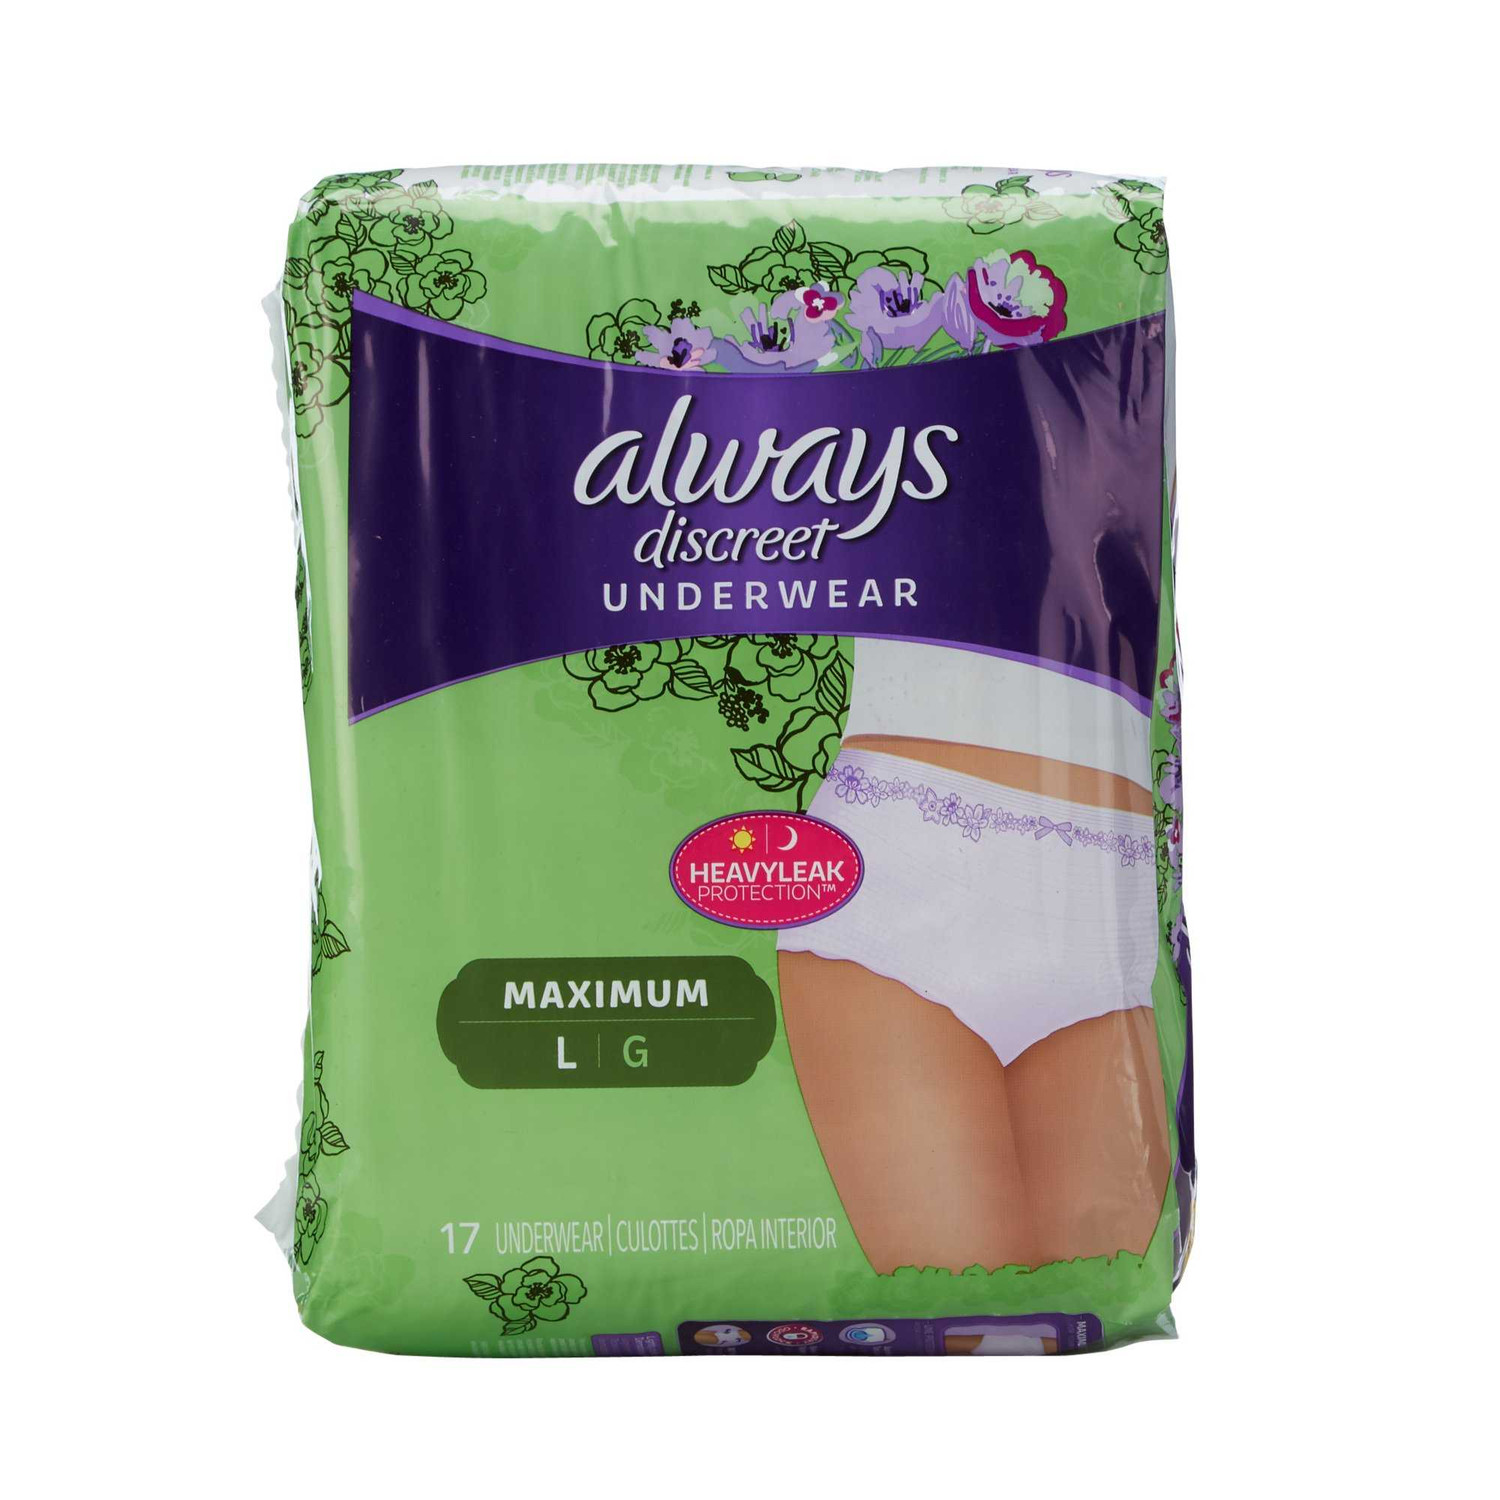 Disposable absorbent underwear for bladder incontinence, Pulls on like  underwear